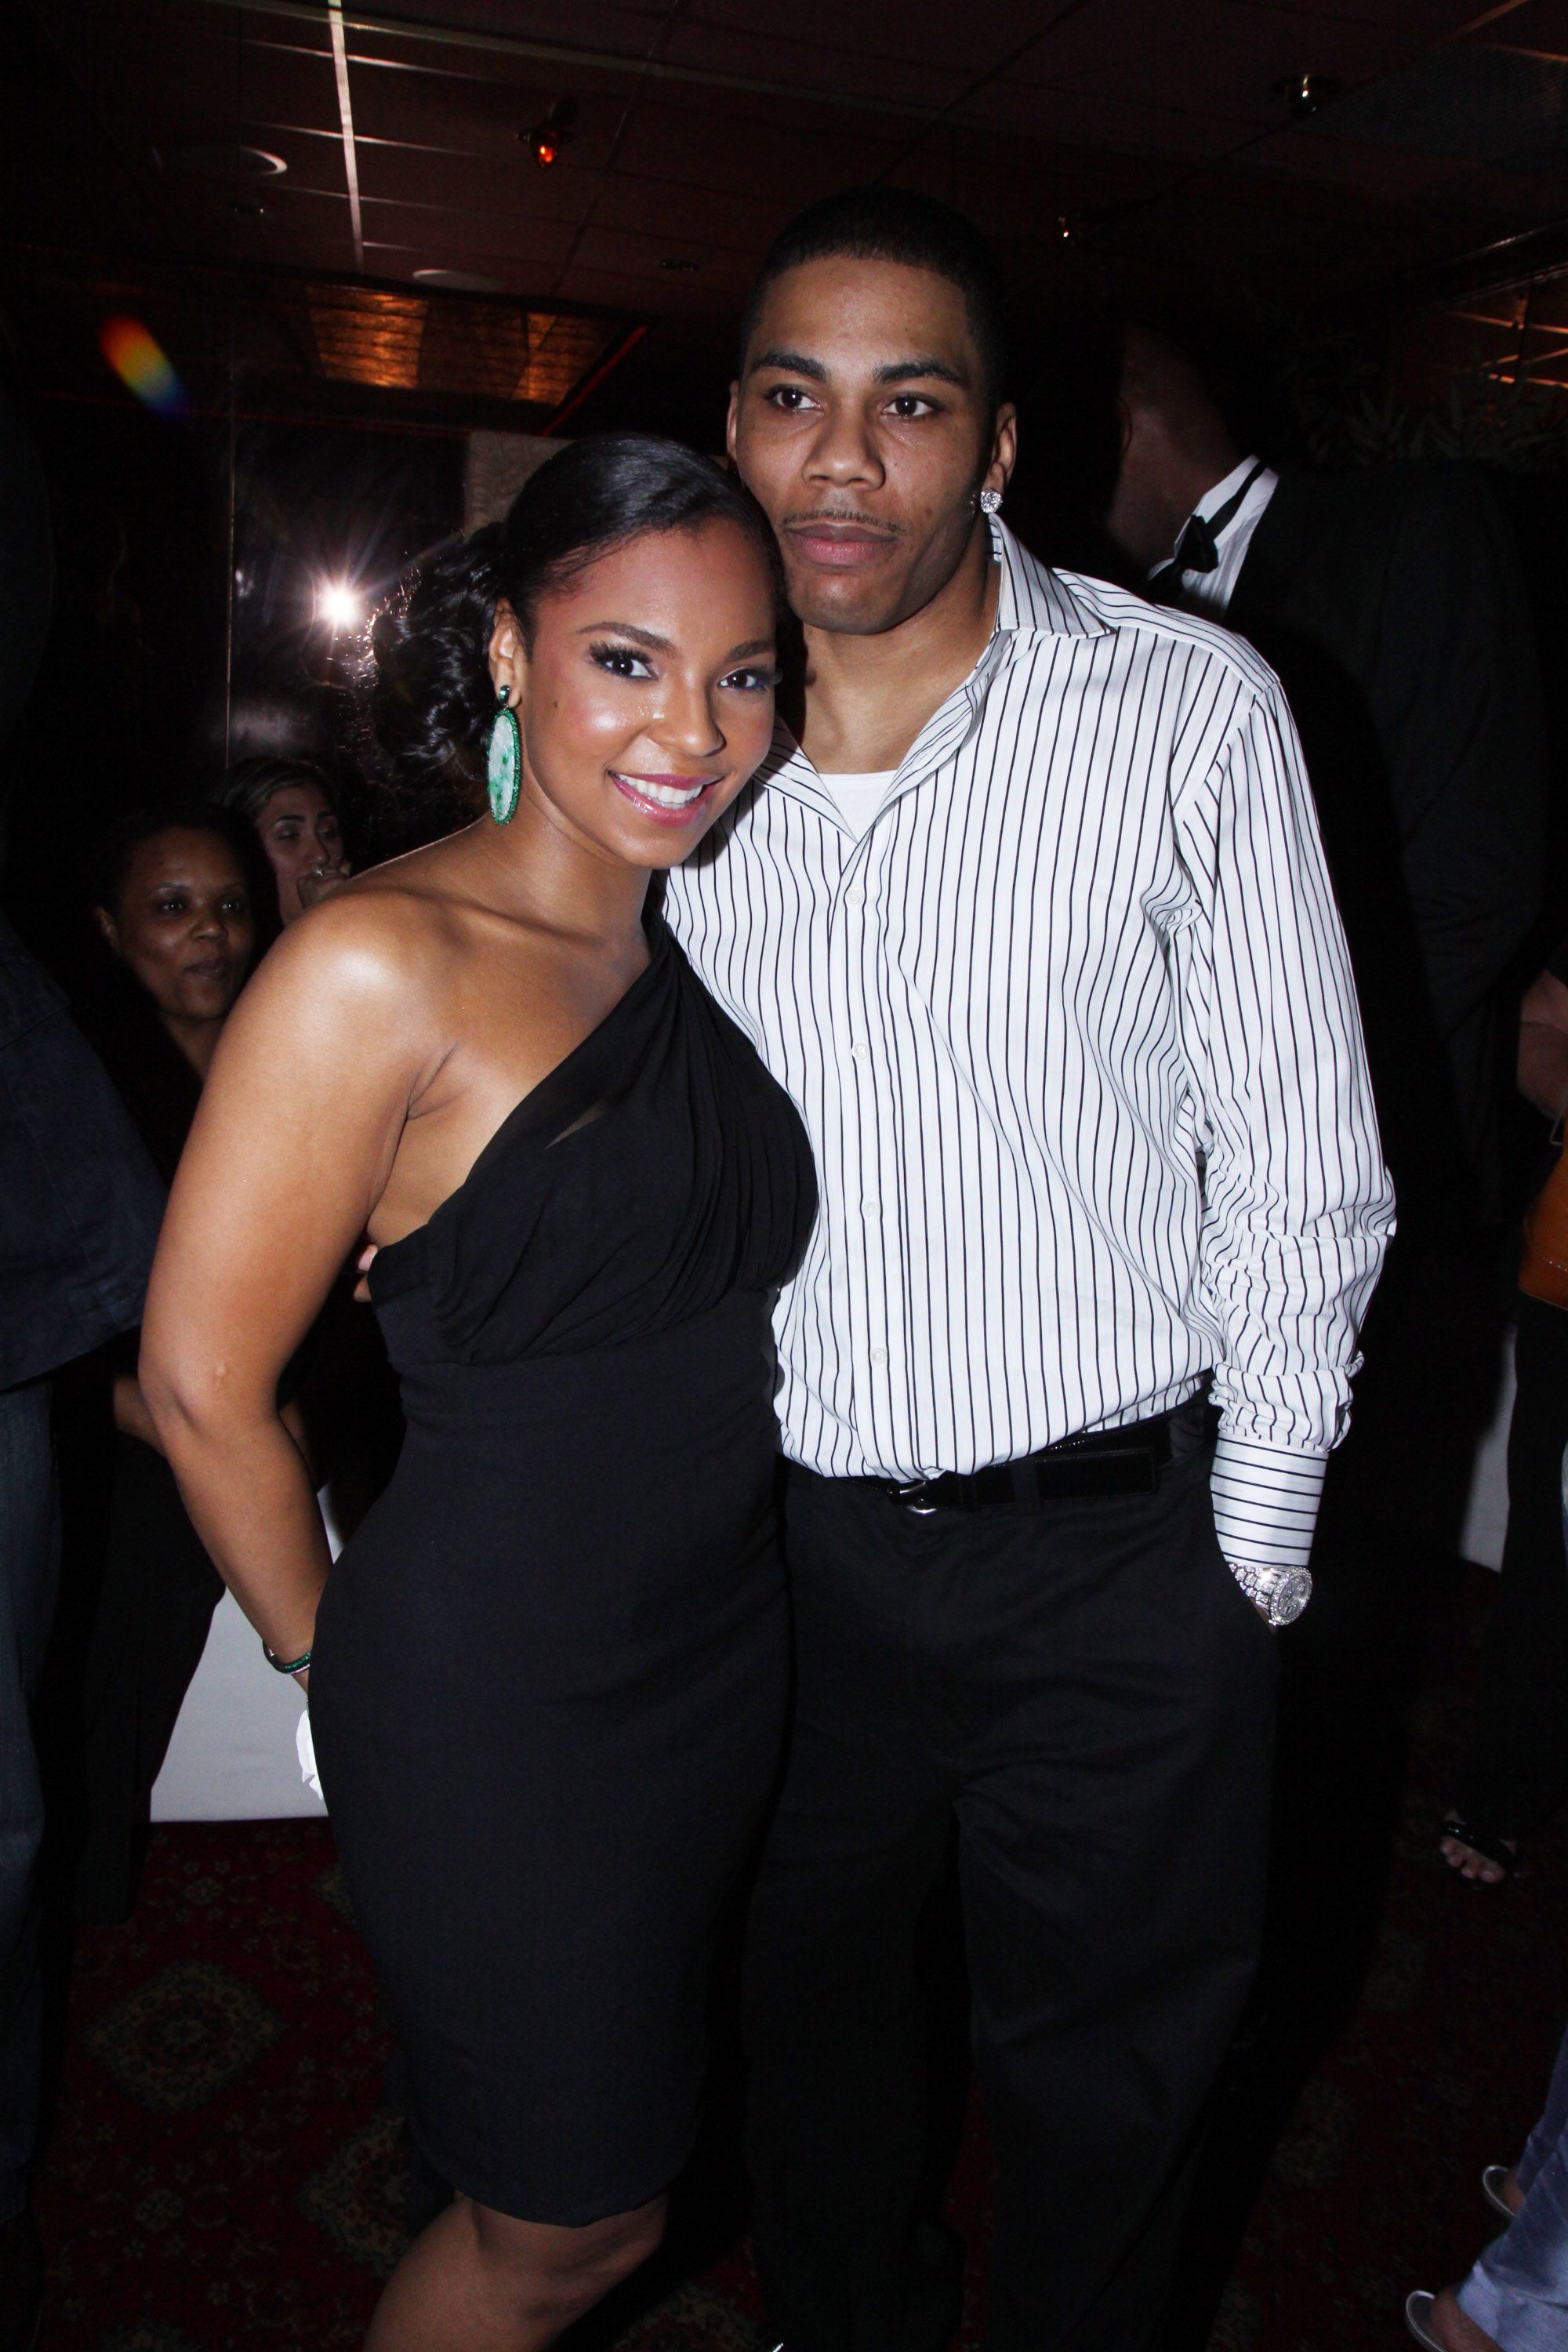 Ashanti and Nelly at "The Wiz" opening night party in 2009 in New York City | Source: Getty Images